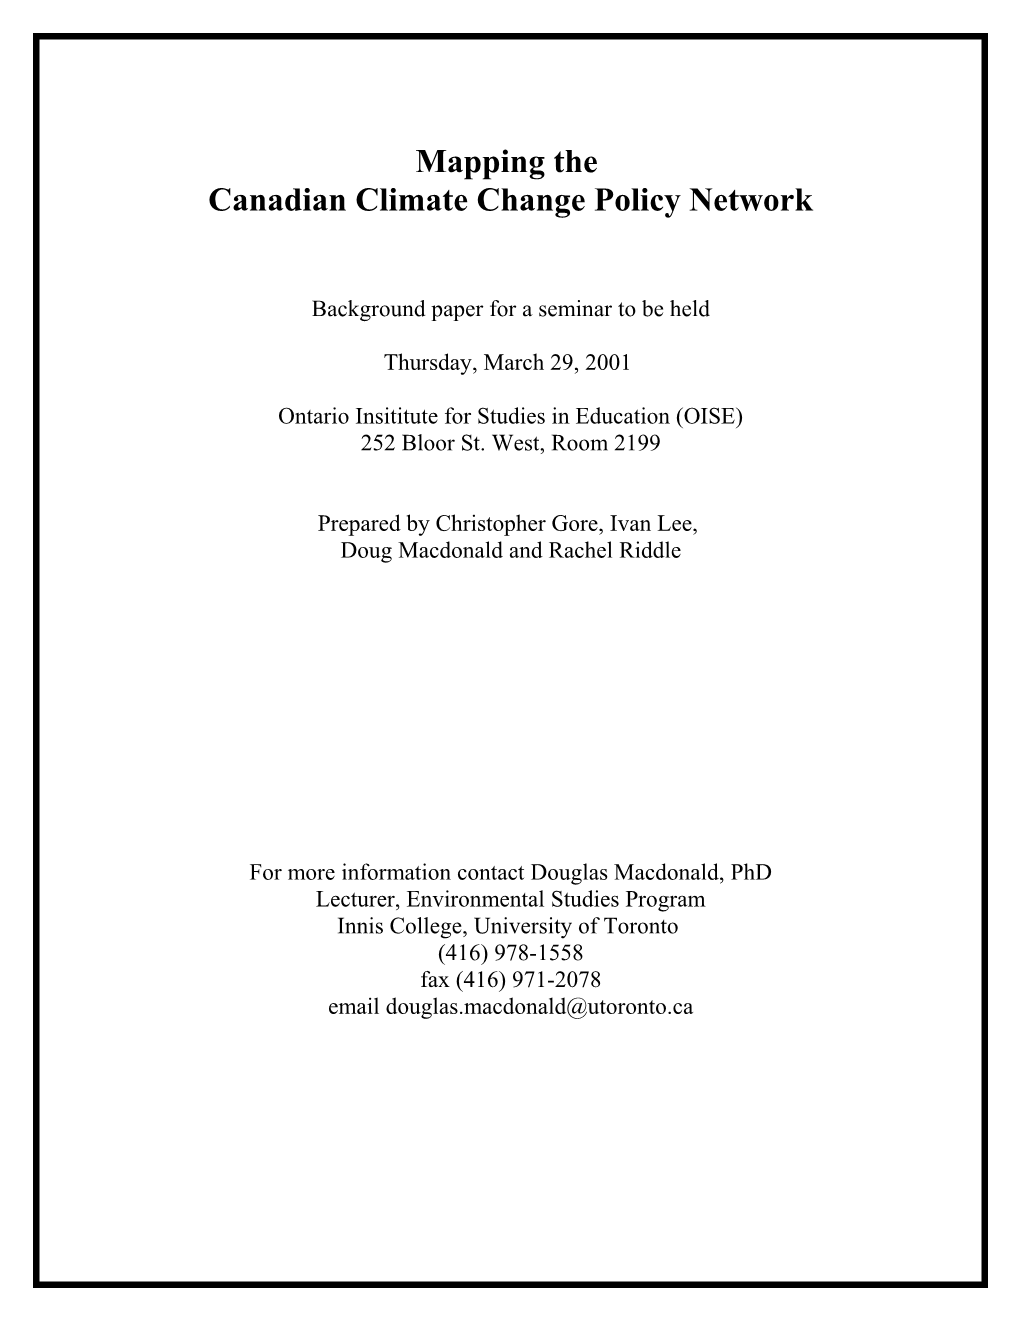 Canadian Climate Change Policy Network